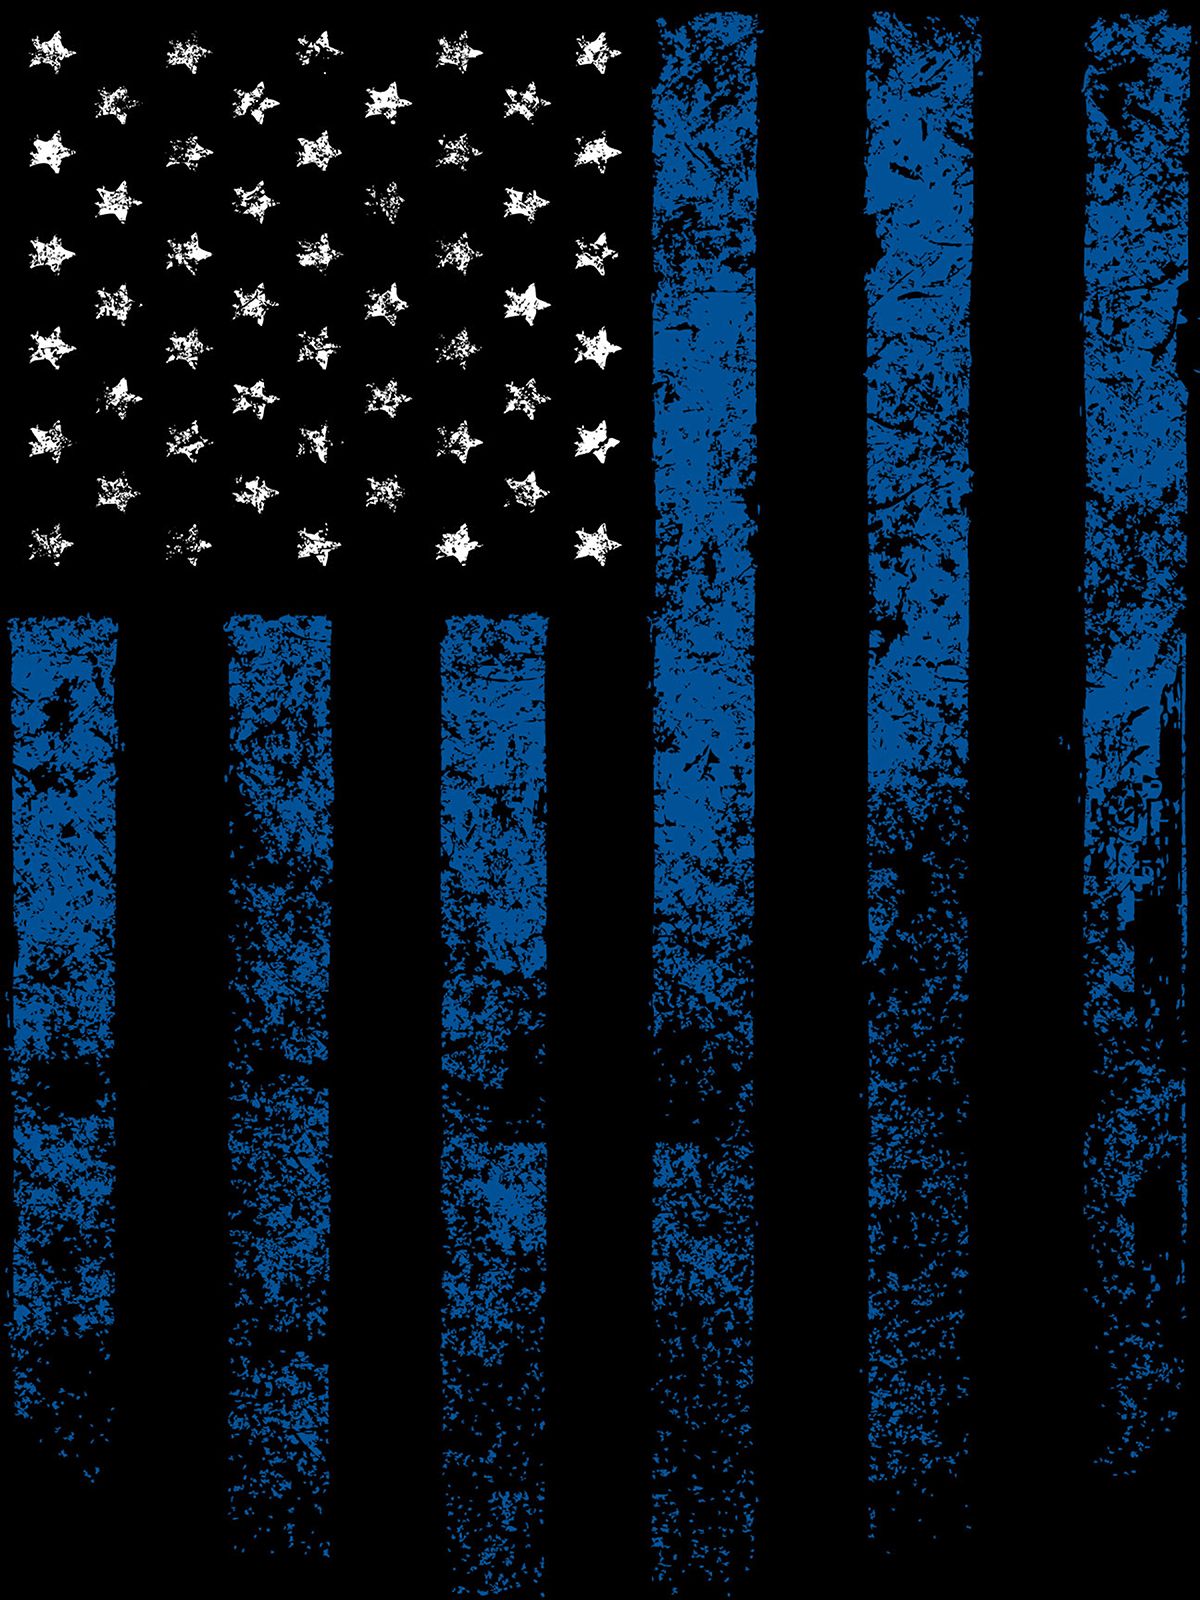 Wallpaper Police Flag Wallpapers.